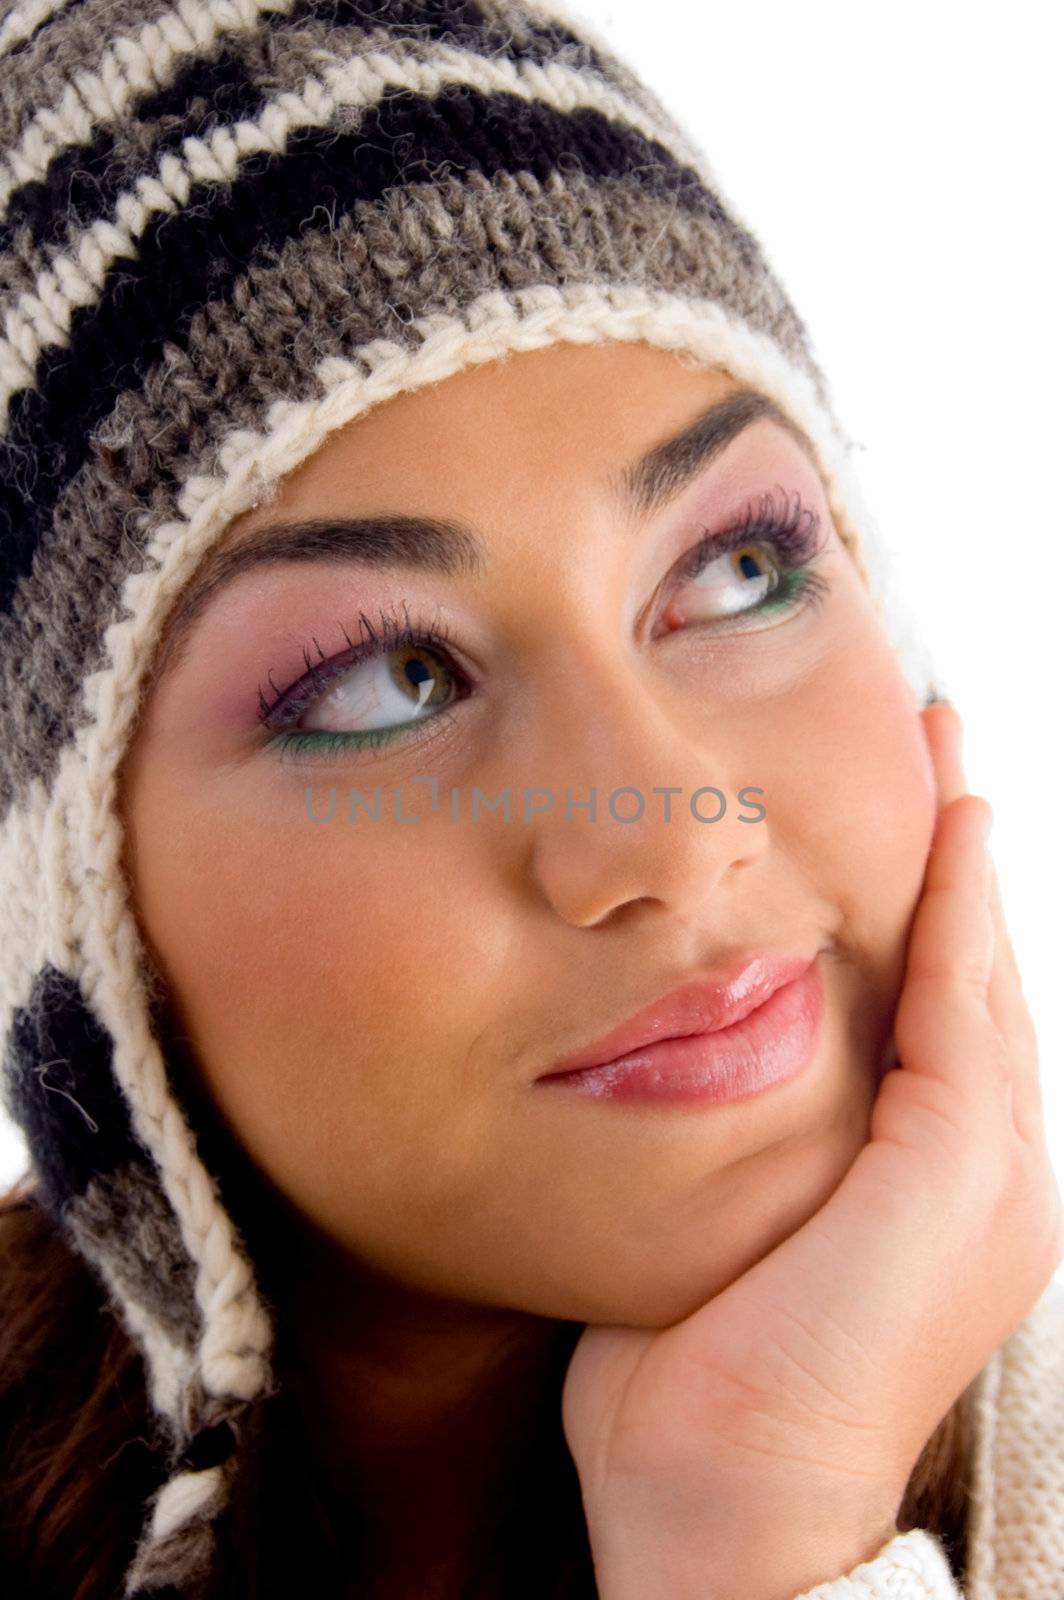 young girl posing with facial expressions against white background